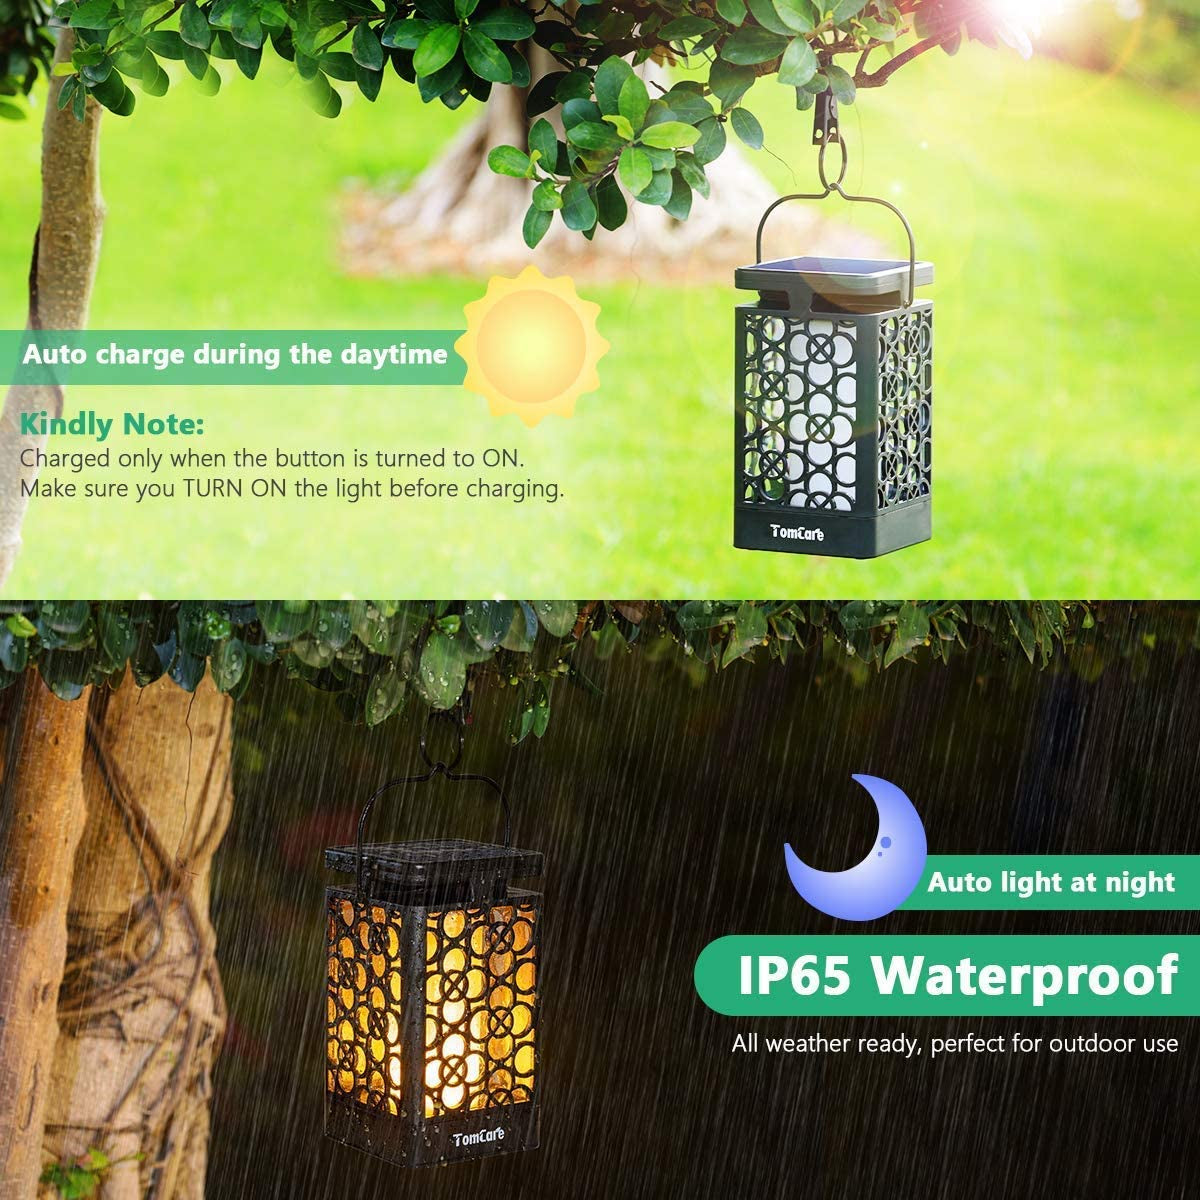 Enhance your outdoor space with solar lanterns. Waterproof, flickering flame lights powered by solar energy. Ideal for patio, deck, and yard. Set of 2